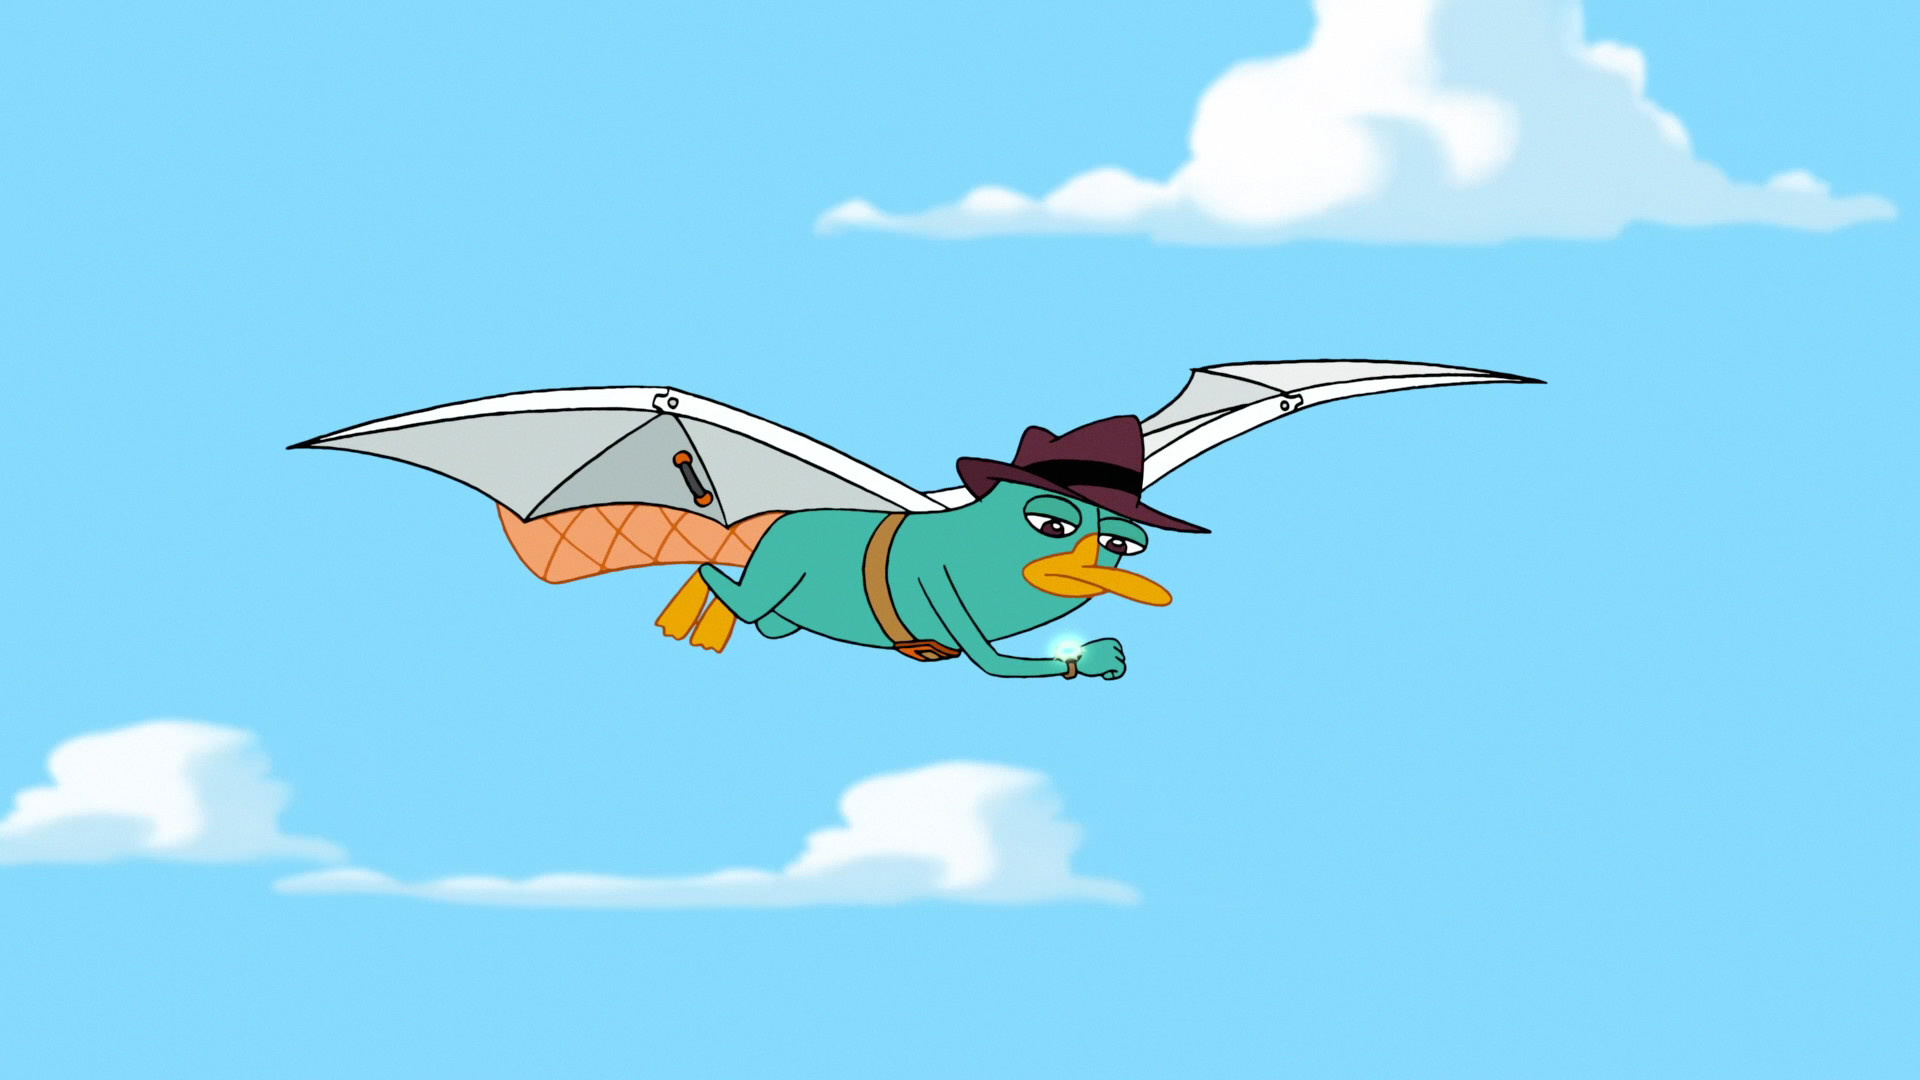 Perry the Platypus, Phineas and Ferb, Wallpaper, Pictures, 1920x1080 Full HD Desktop